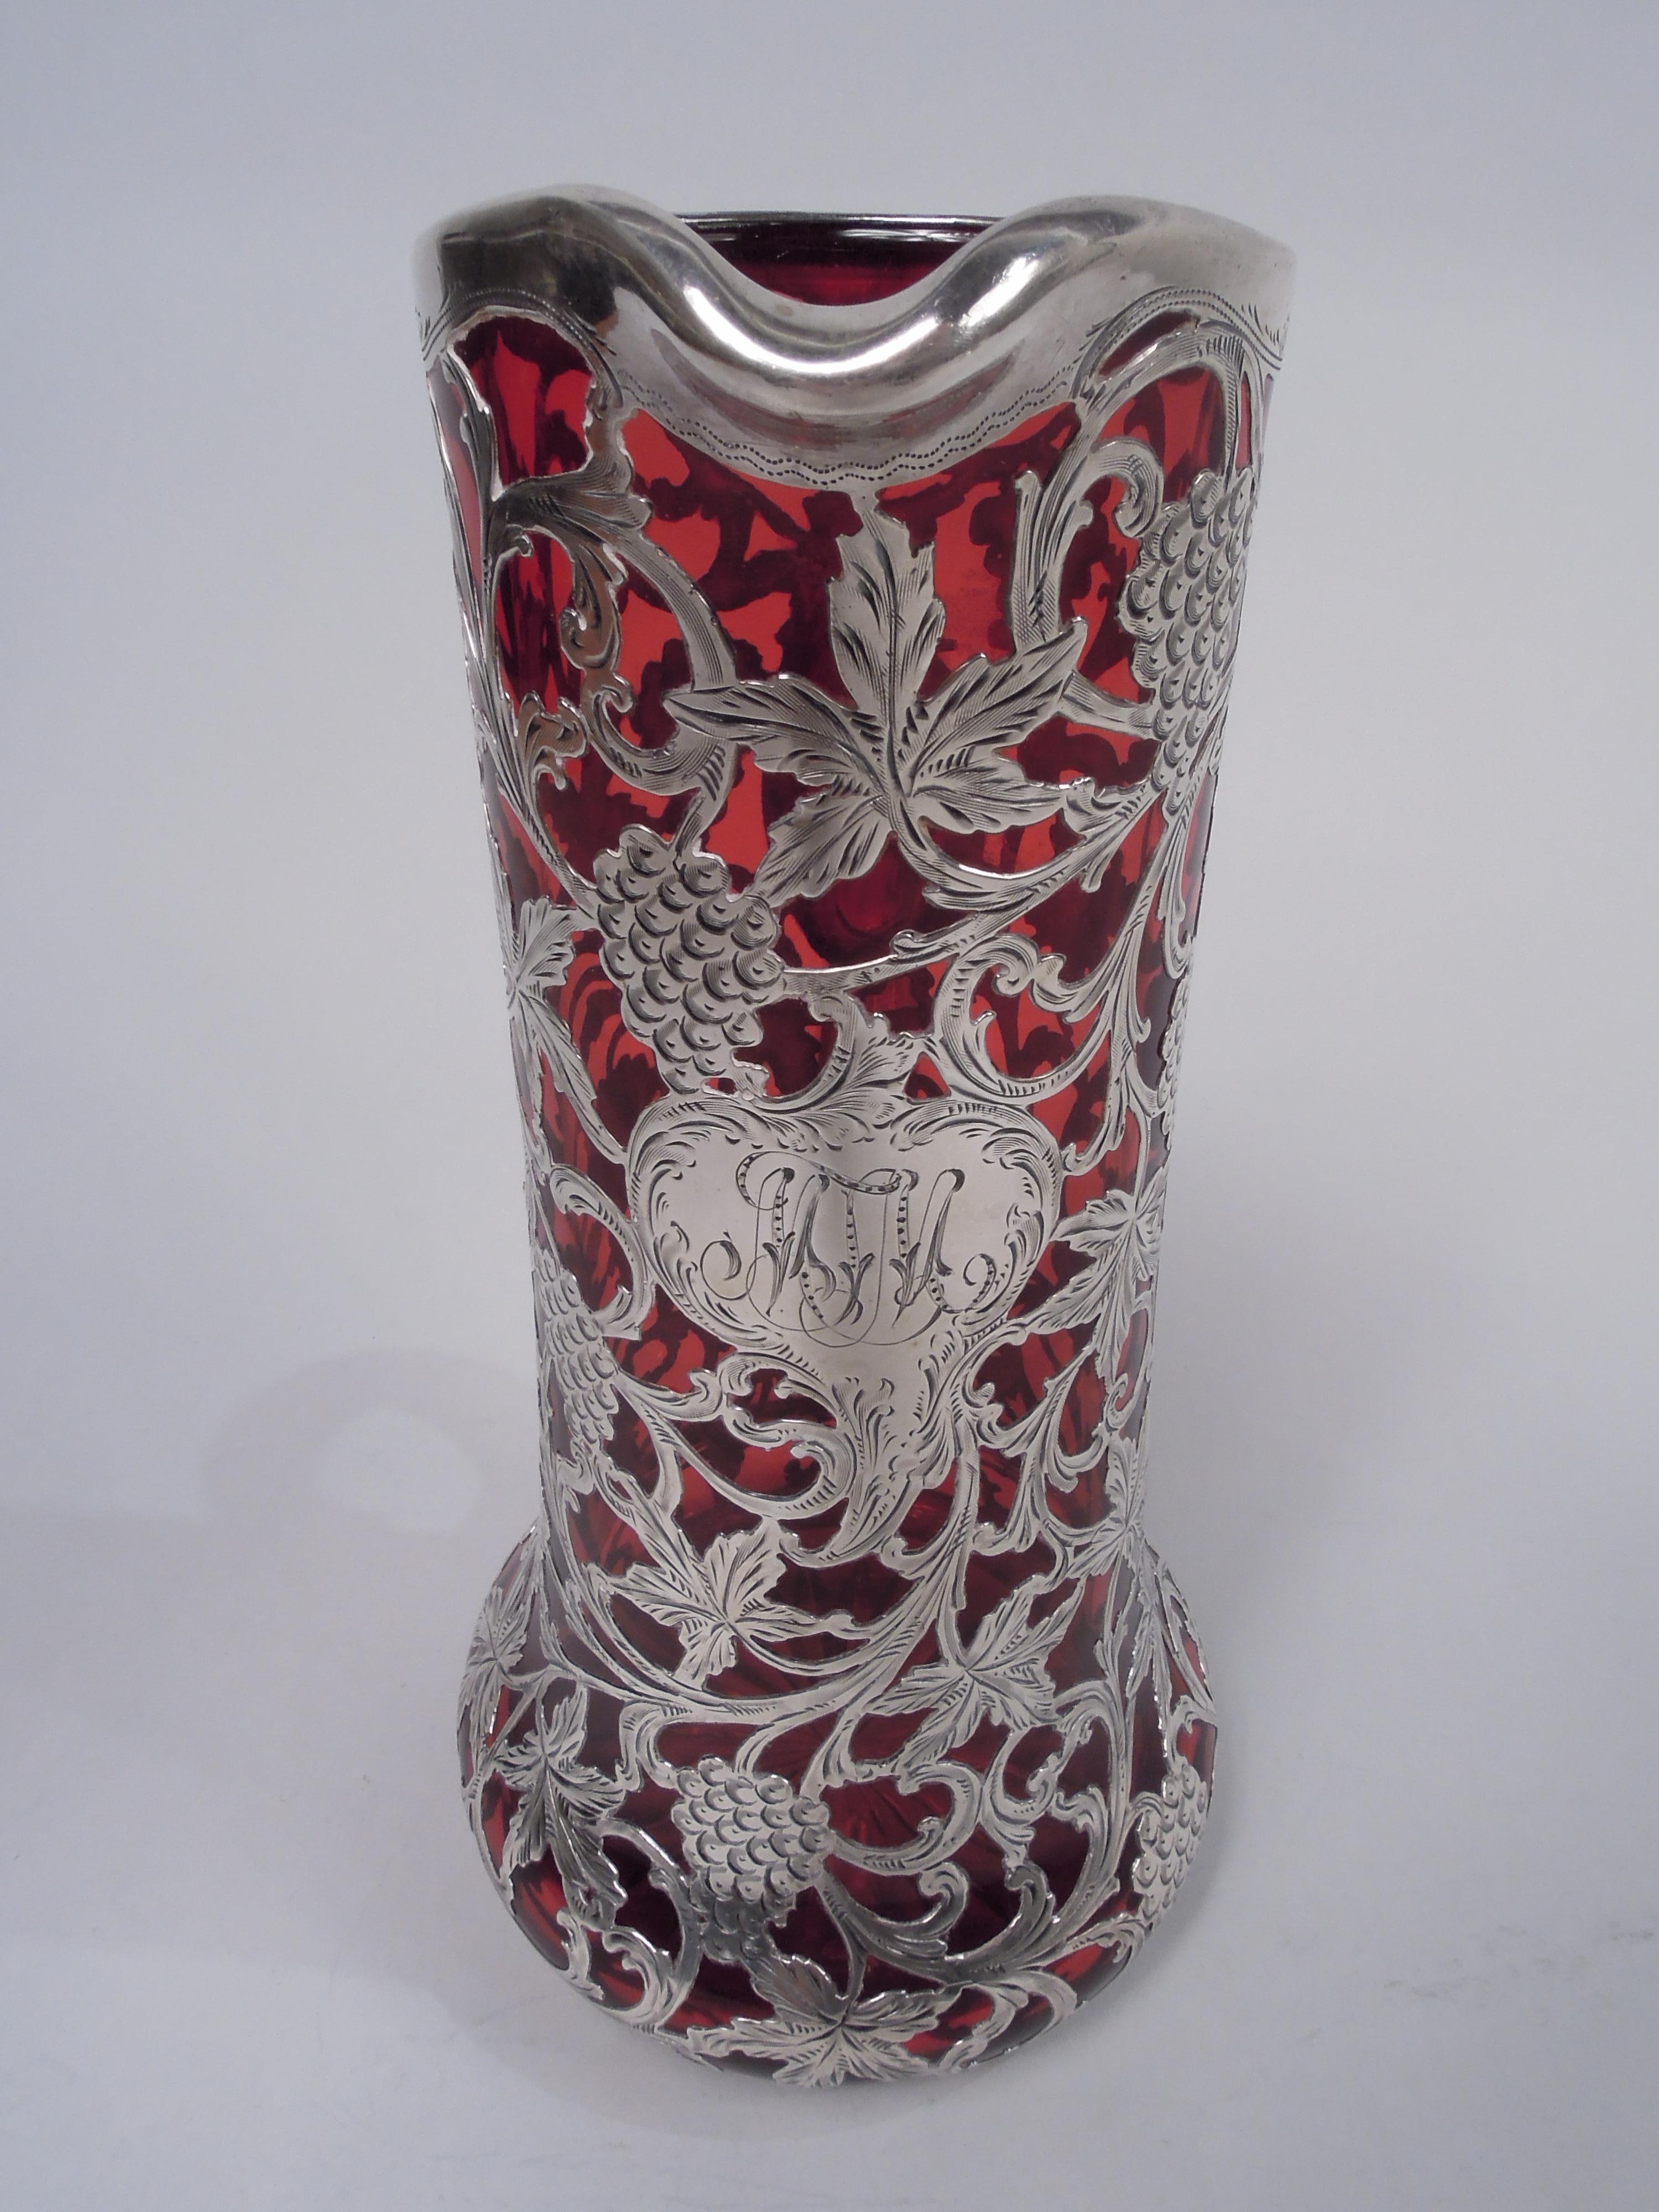 Art Nouveau glass claret jug with engraved silver overlay. Made by Alvin Corp. in Providence, ca 1900. Cylindrical with small lip spout and spread base; c-scroll handle in silver collar. On underside cut-to-clear star. Overlay in form of entwined